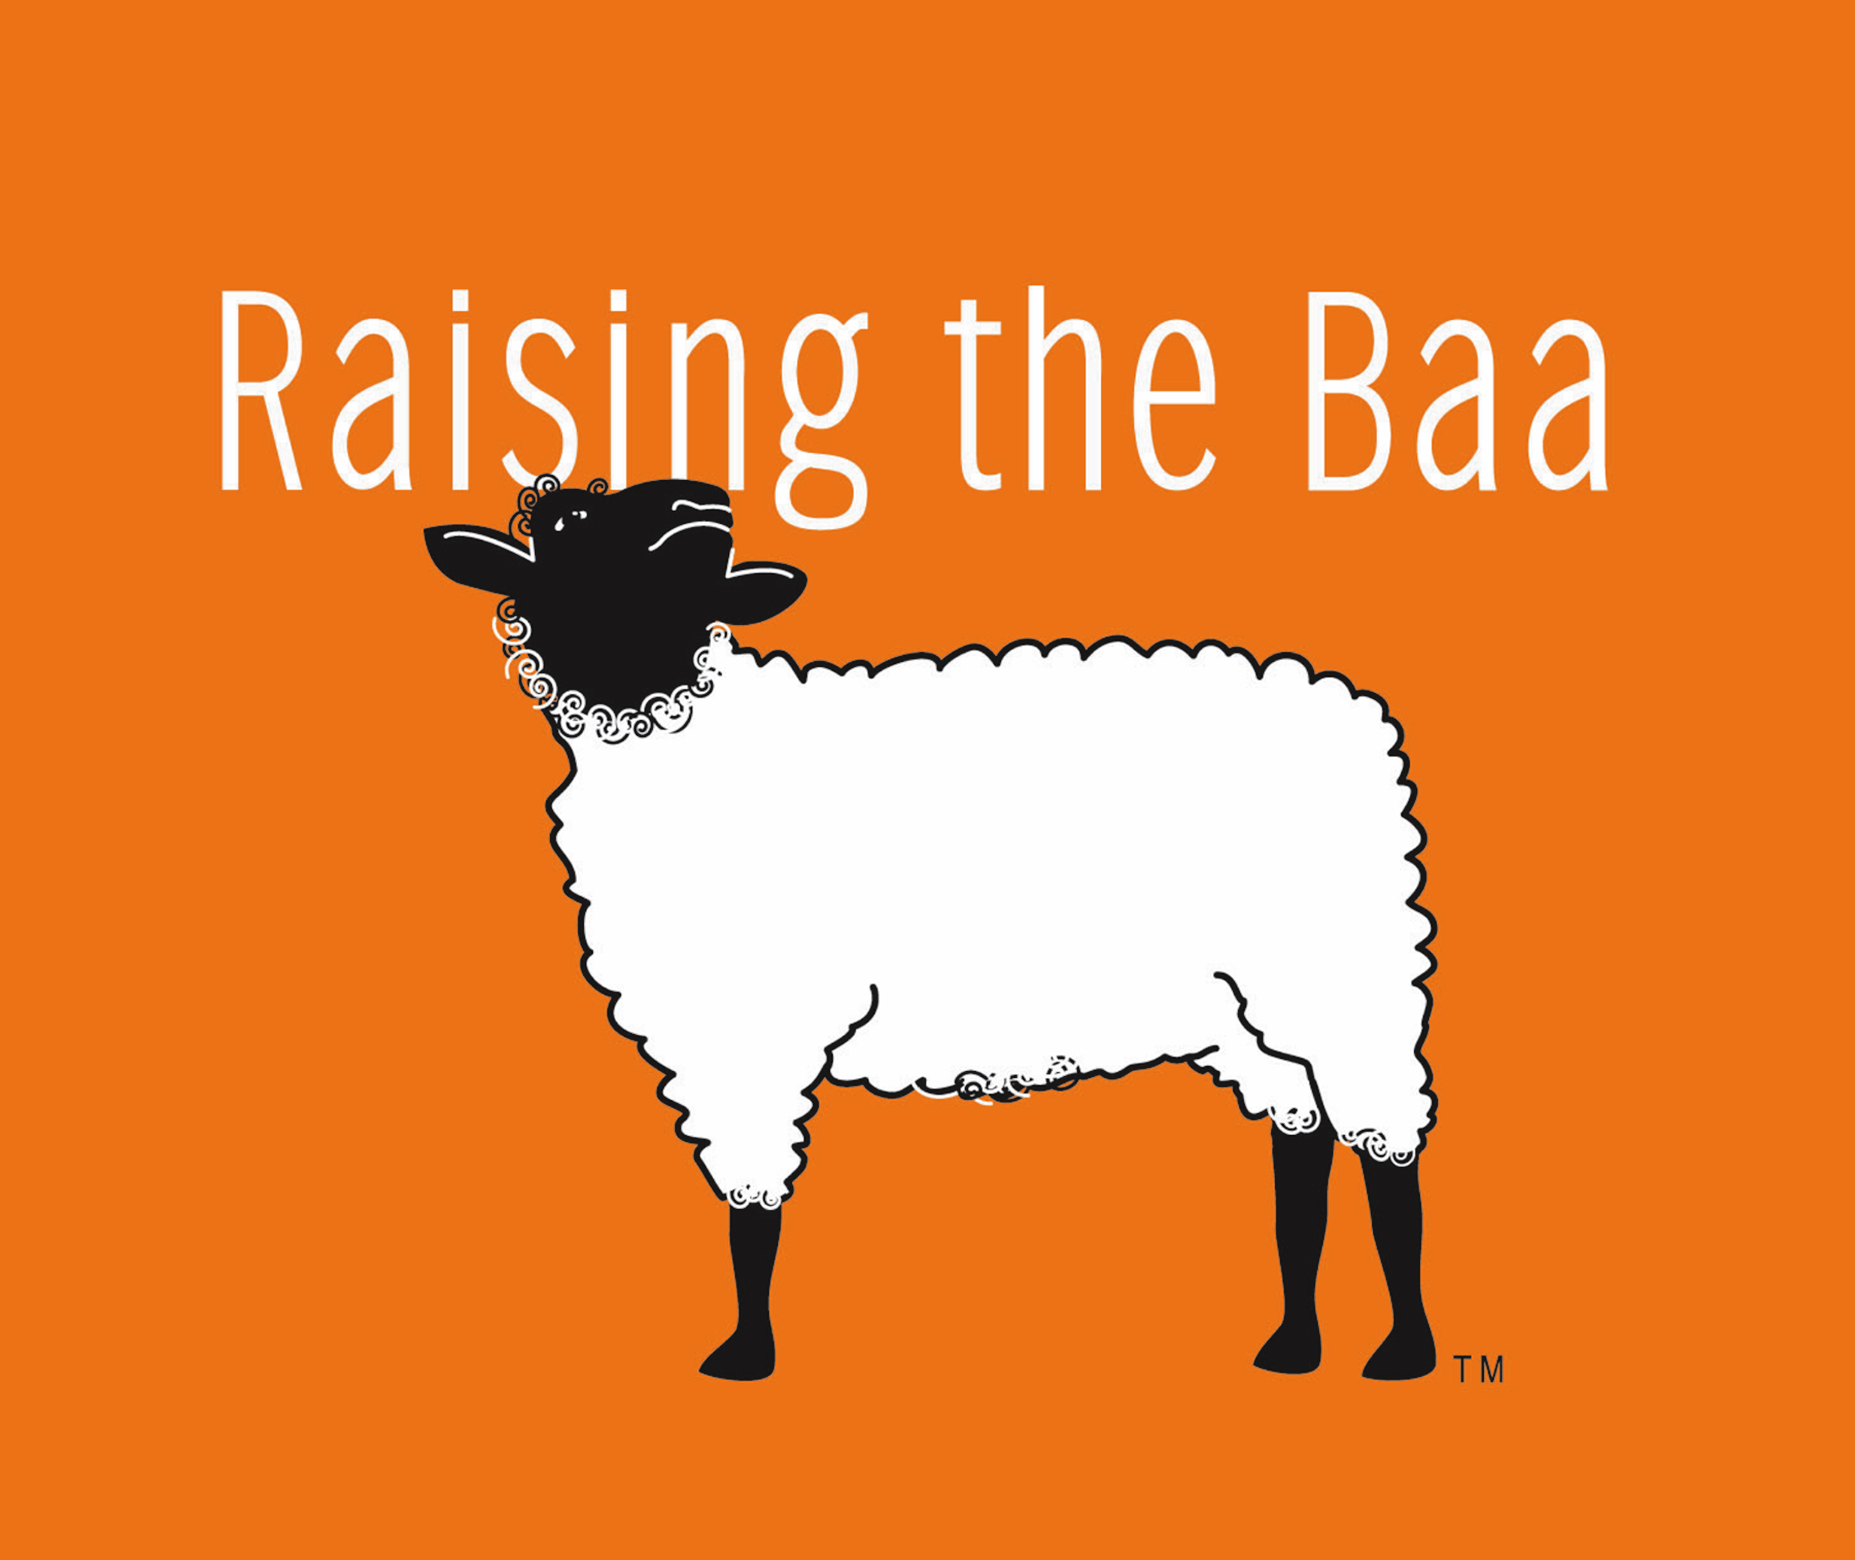 200 sheep to shear - how would you set about the task? - RTB-Logo